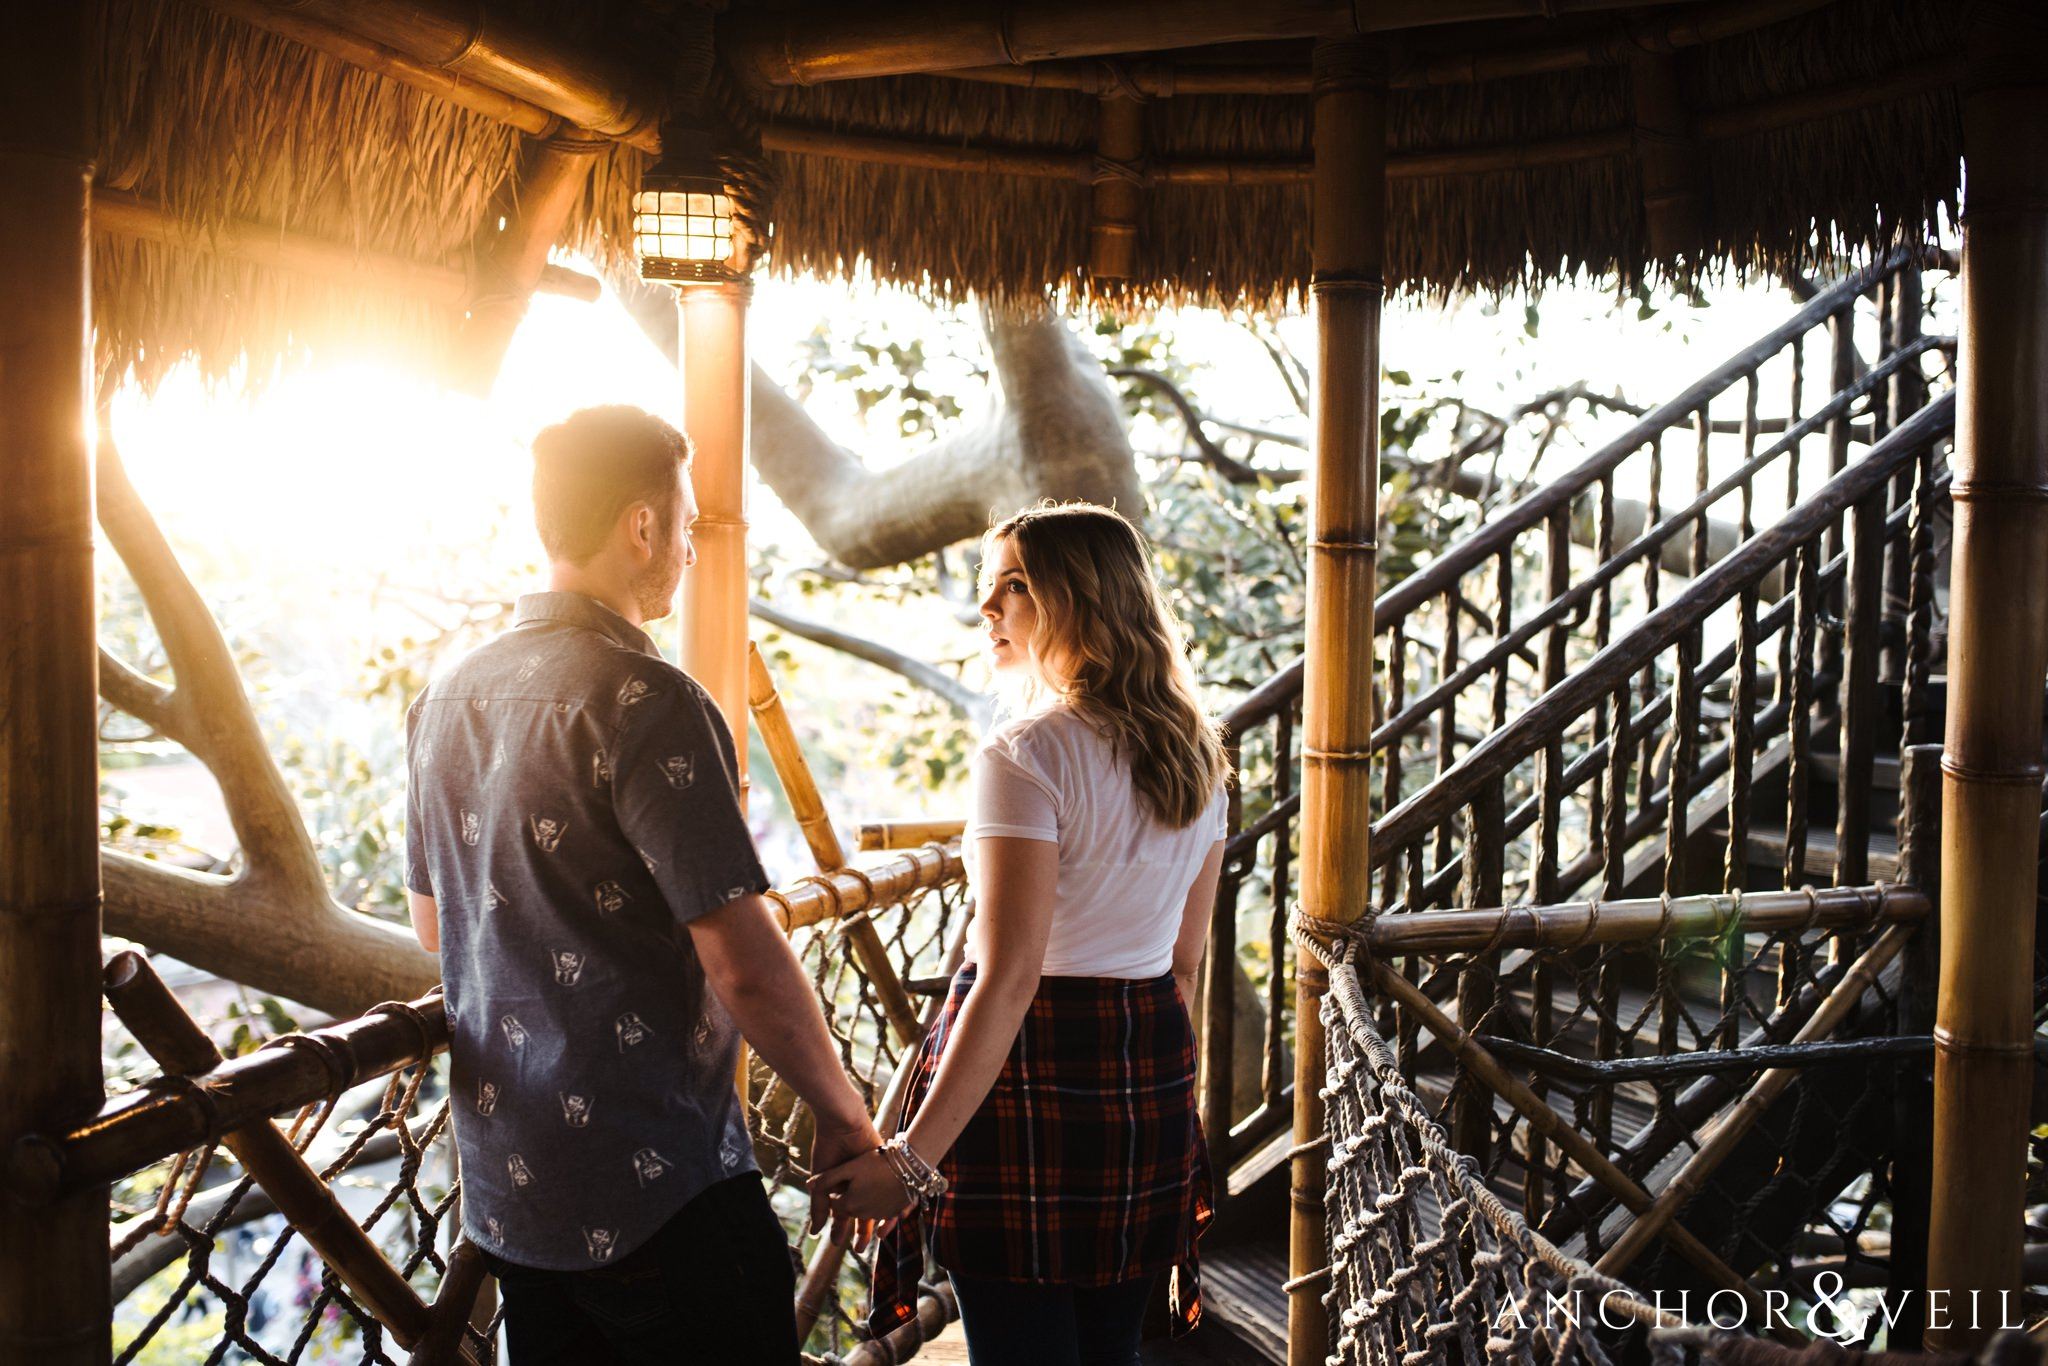 leading him up the robinson crusoe tree house during their Disney world engagement session at Disney's Magic Kingdom